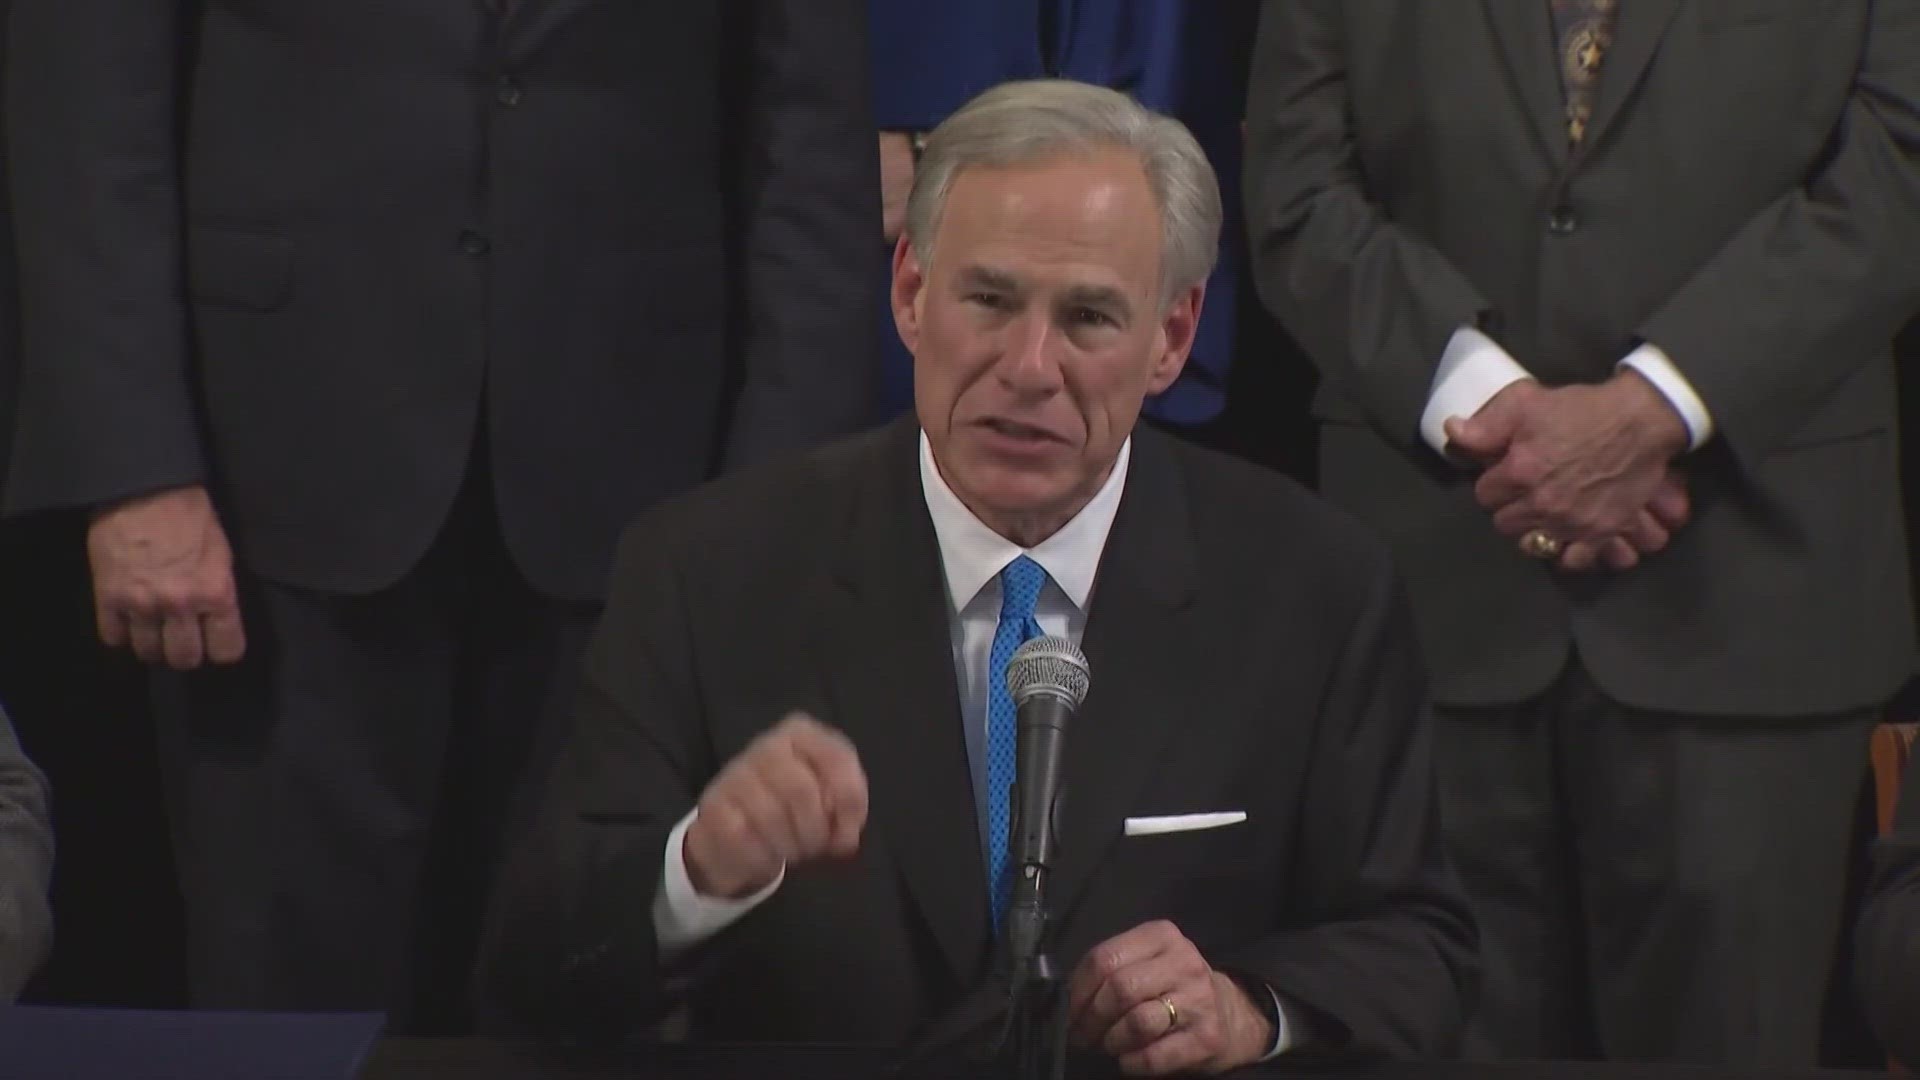 The current veto streak is Gov. Abbott's way of sending a message to lawmakers to prioritize property tax relief.